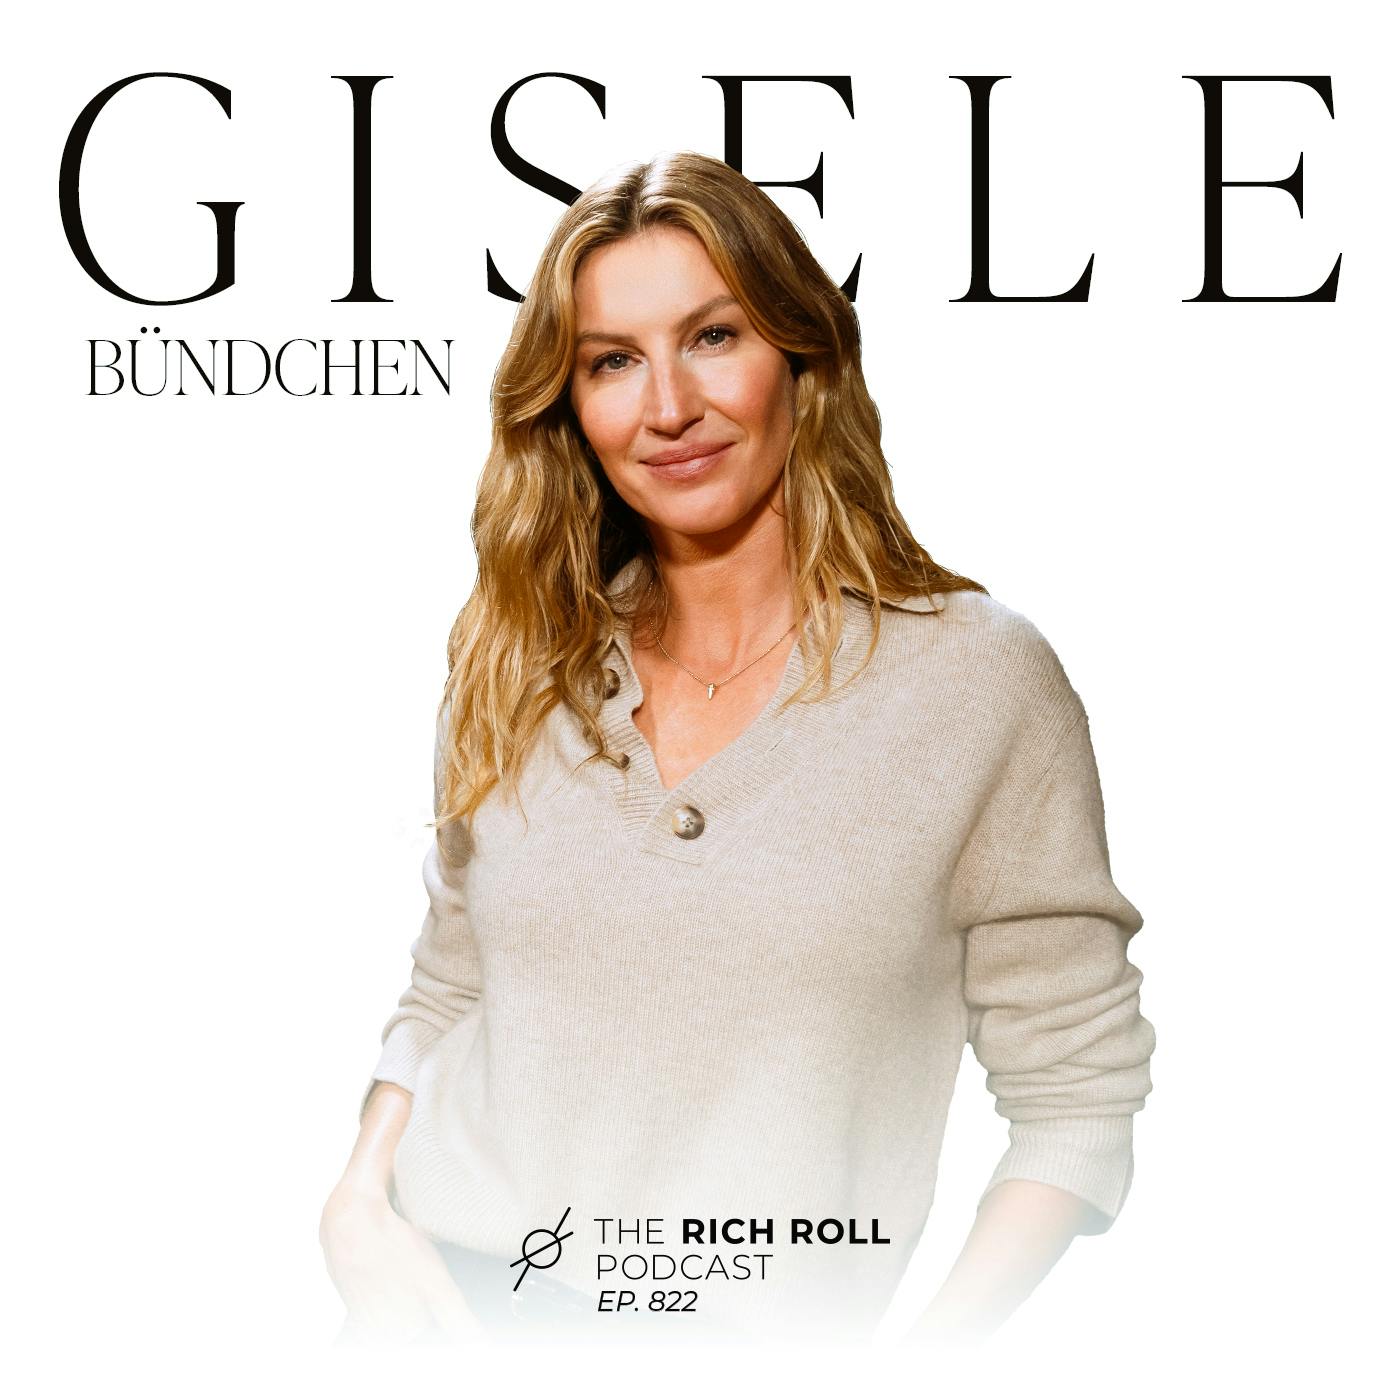 Modeling Well-Being: Gisele Bündchen On Nourishing The Self, The Soul & The Planet